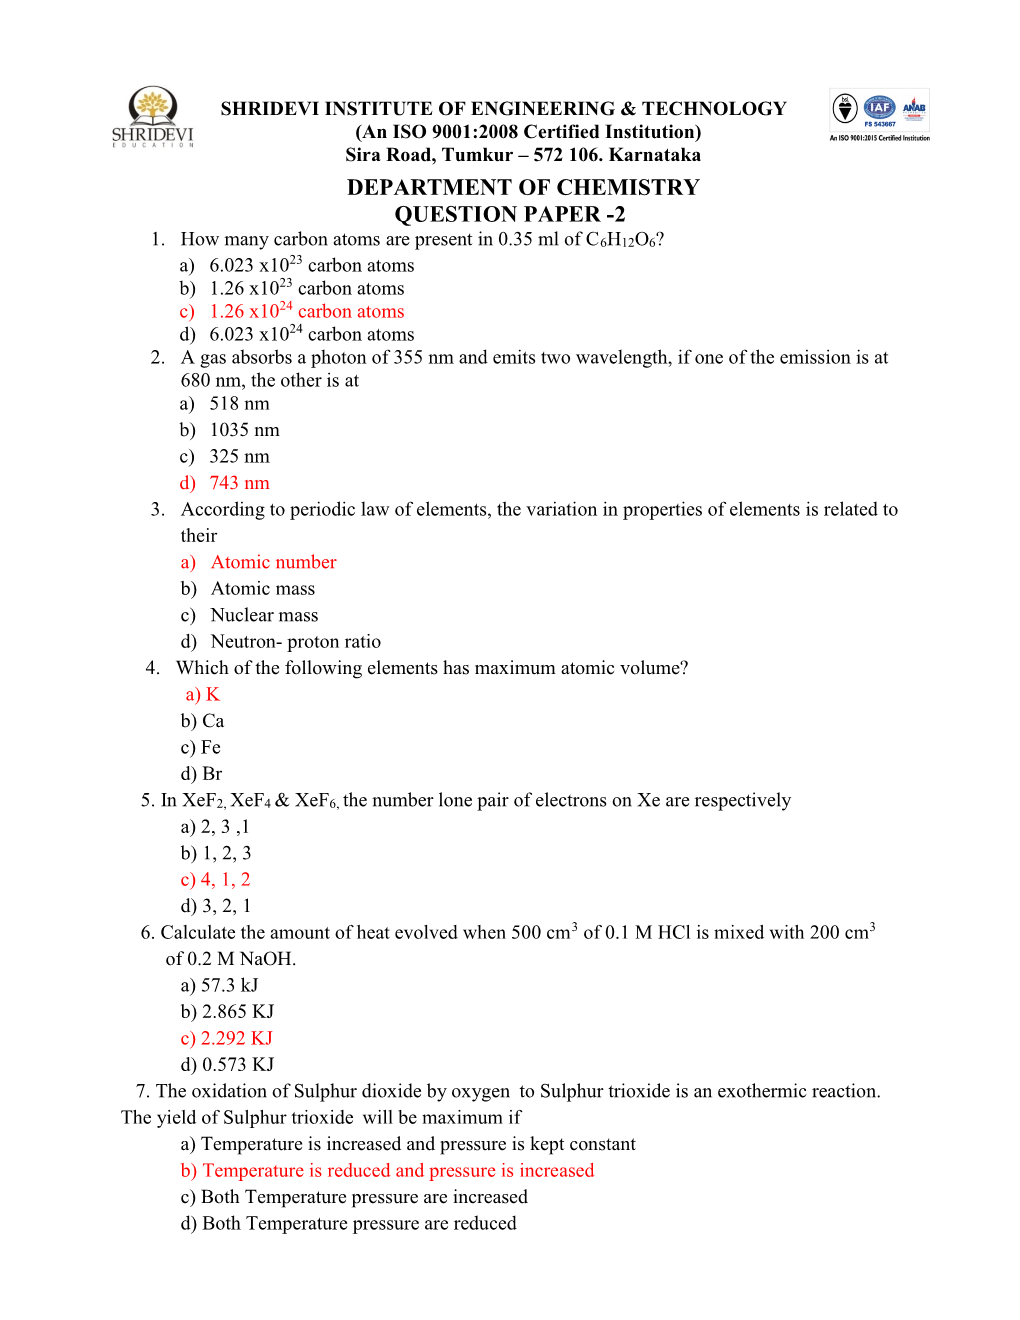 Department of Chemistry Question Paper -2 1